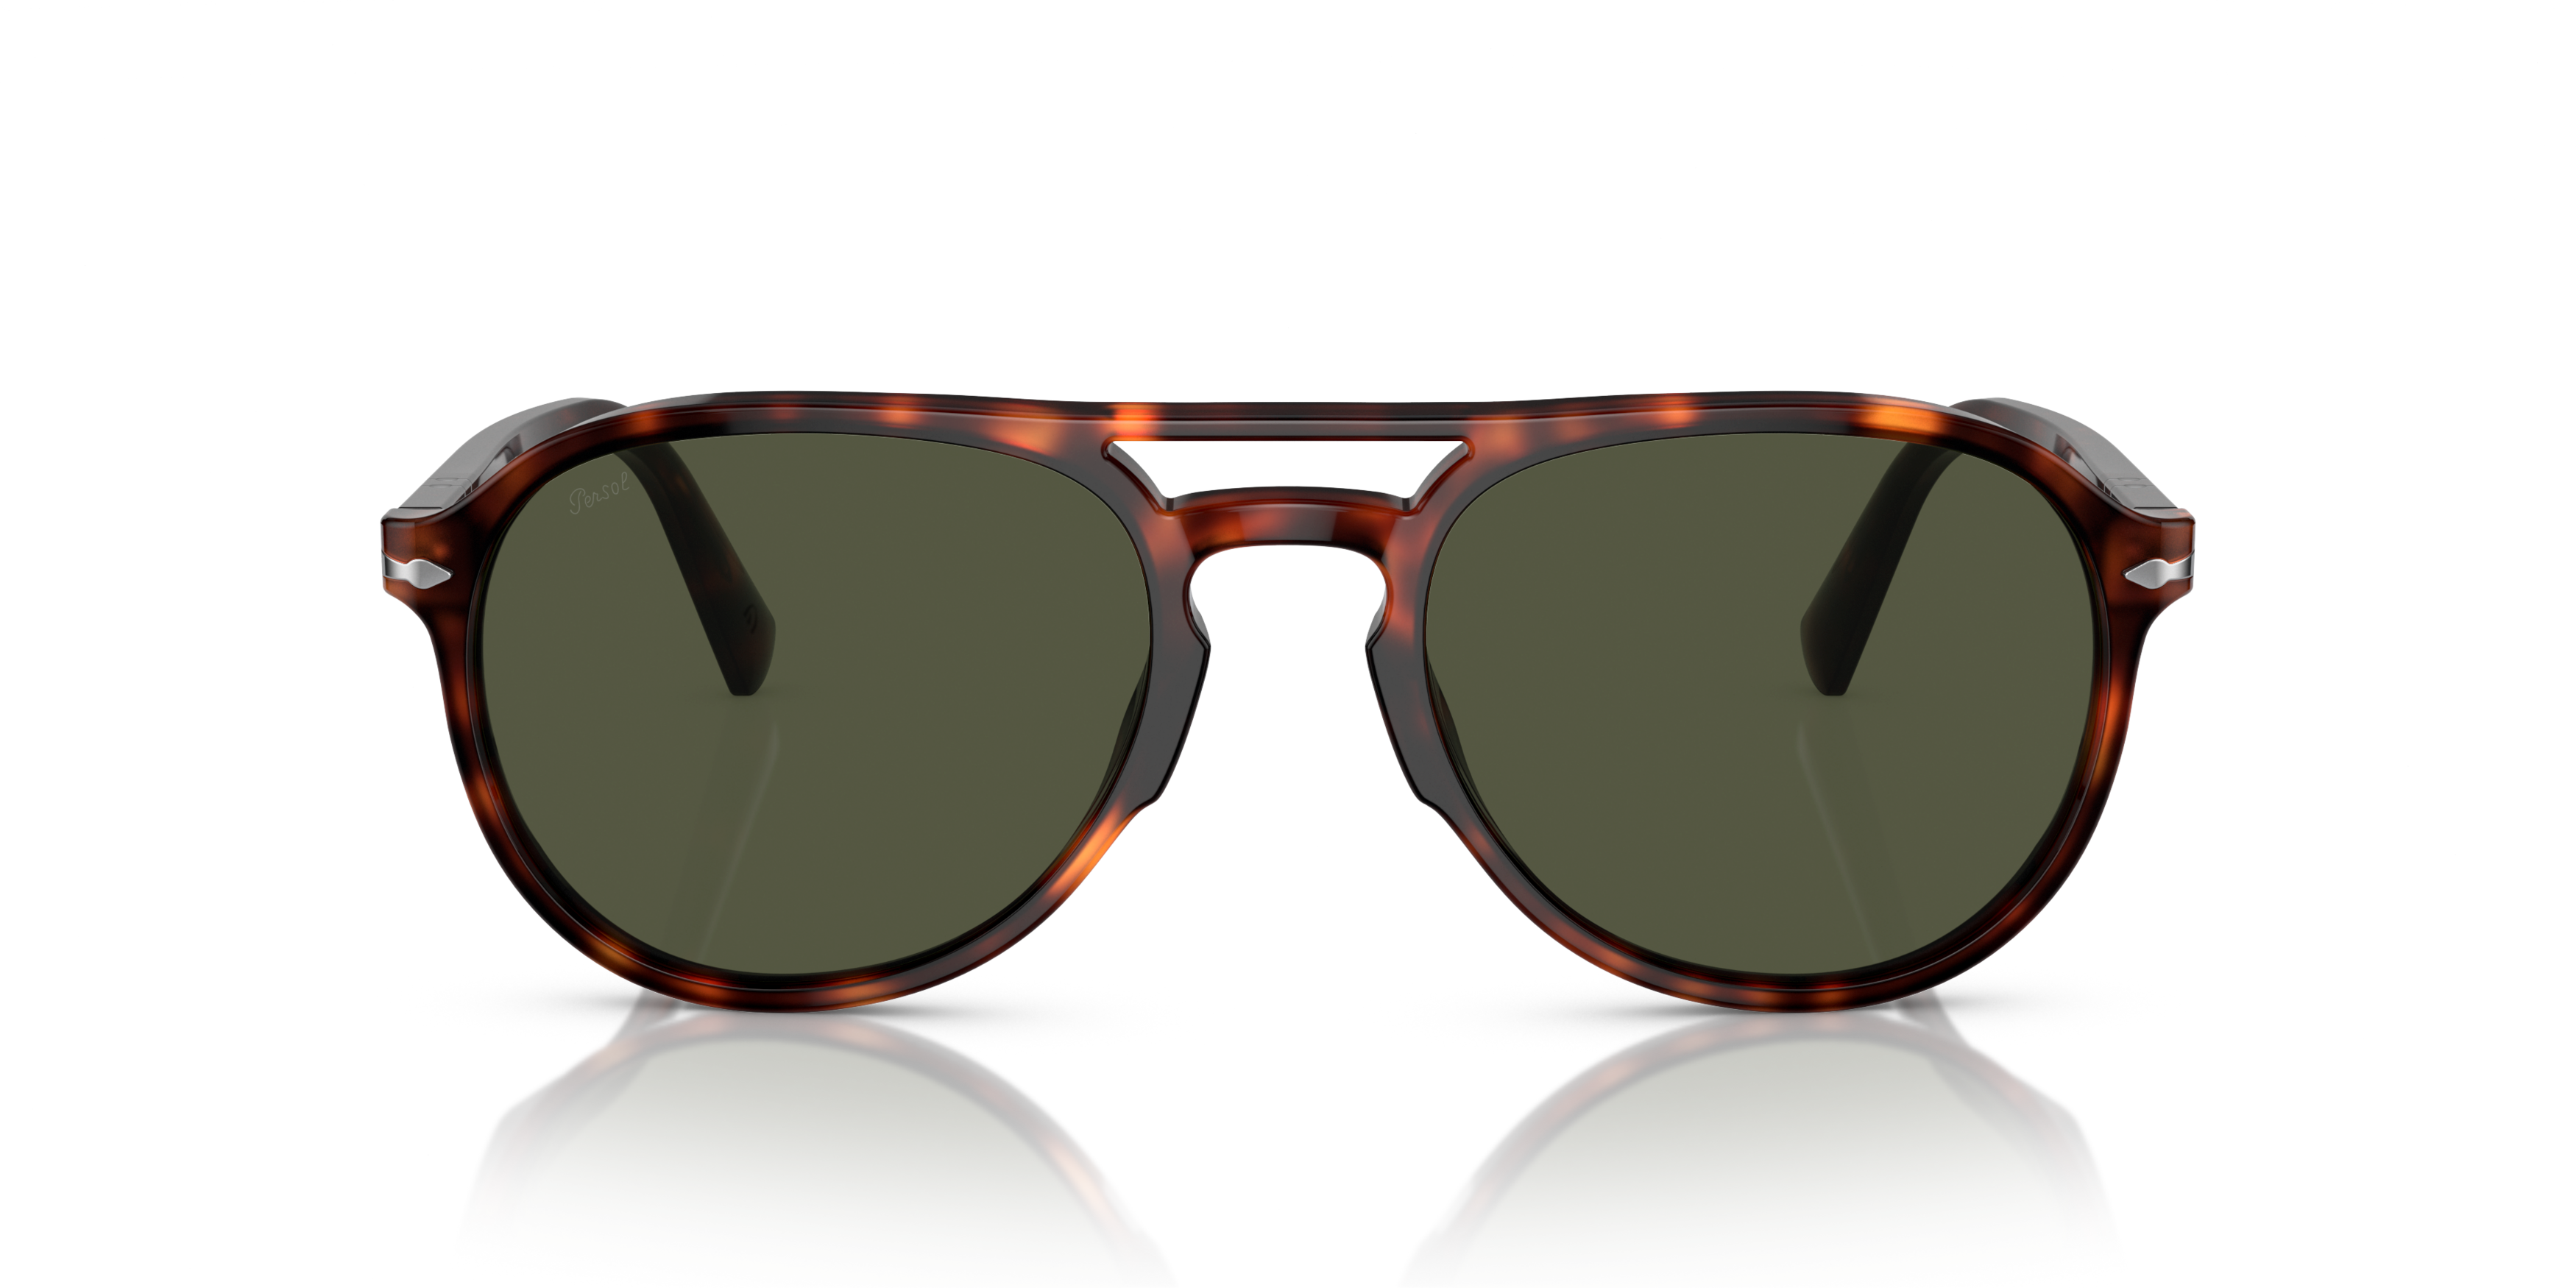 [products.image.front] PERSOL PO3235S 24/31